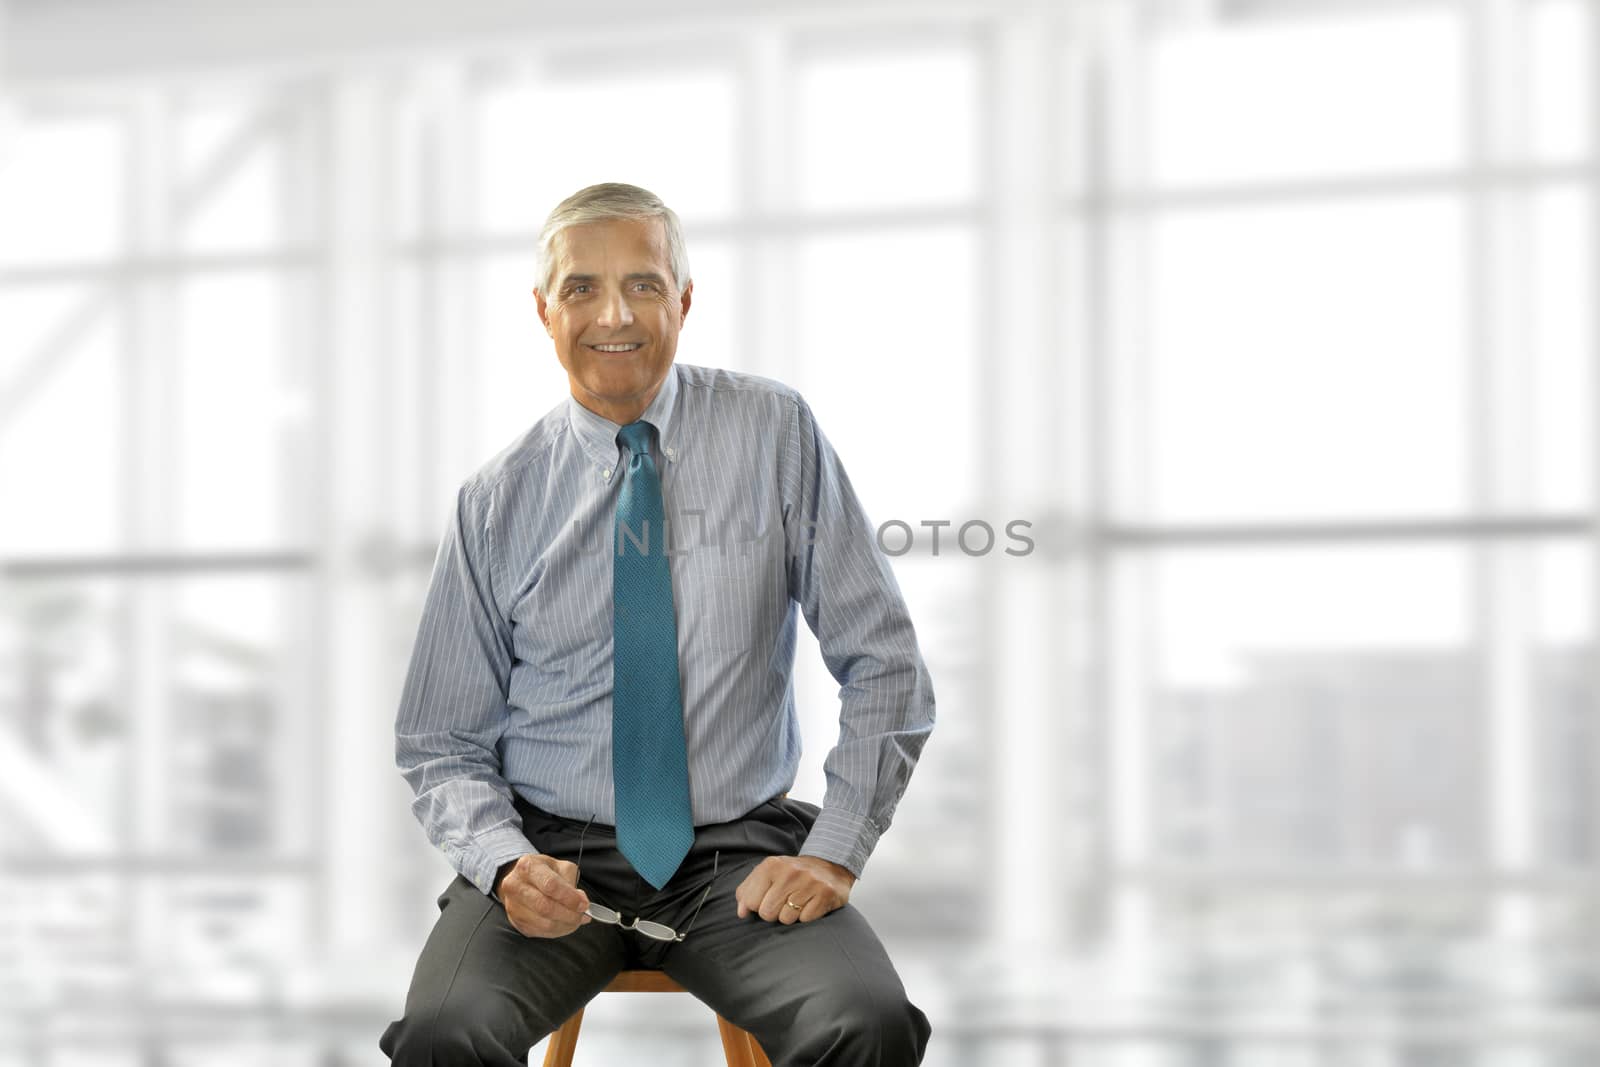 Portrait of smiling senior businessman sitting on a stool against office window background while looking at camera.